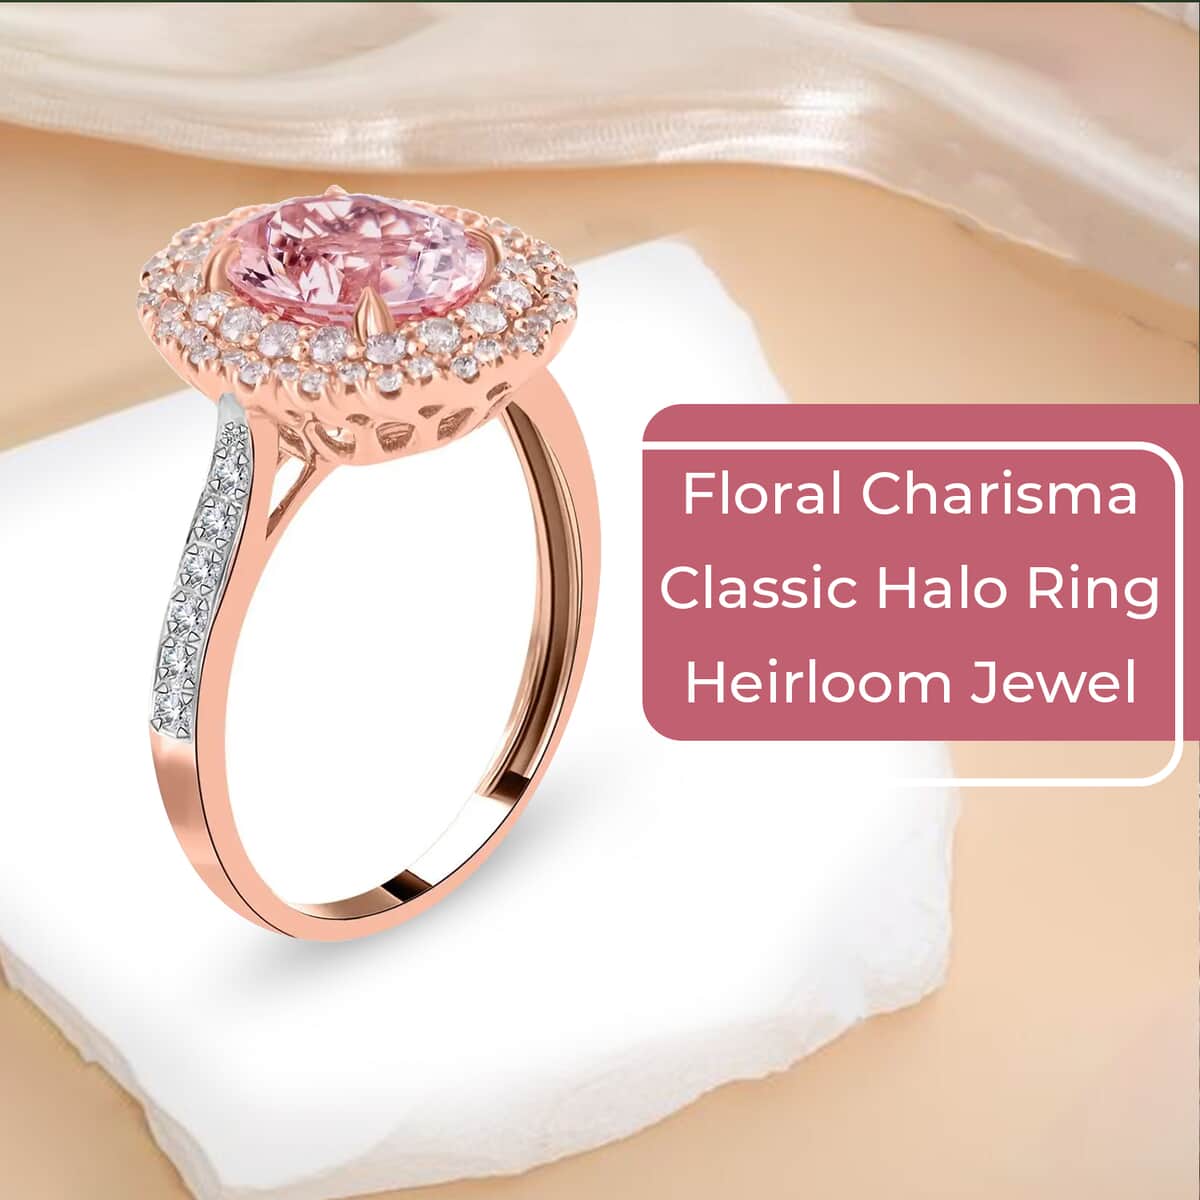 Ankur Treasure Chest Modani Marropino Morganite Ring, 14K Rose Gold Ring, Diamond Floral Halo Ring, Natural Pink And White Diamond Accent Ring, Promise Rings 1.95 ctw (Size 5.0) image number 3